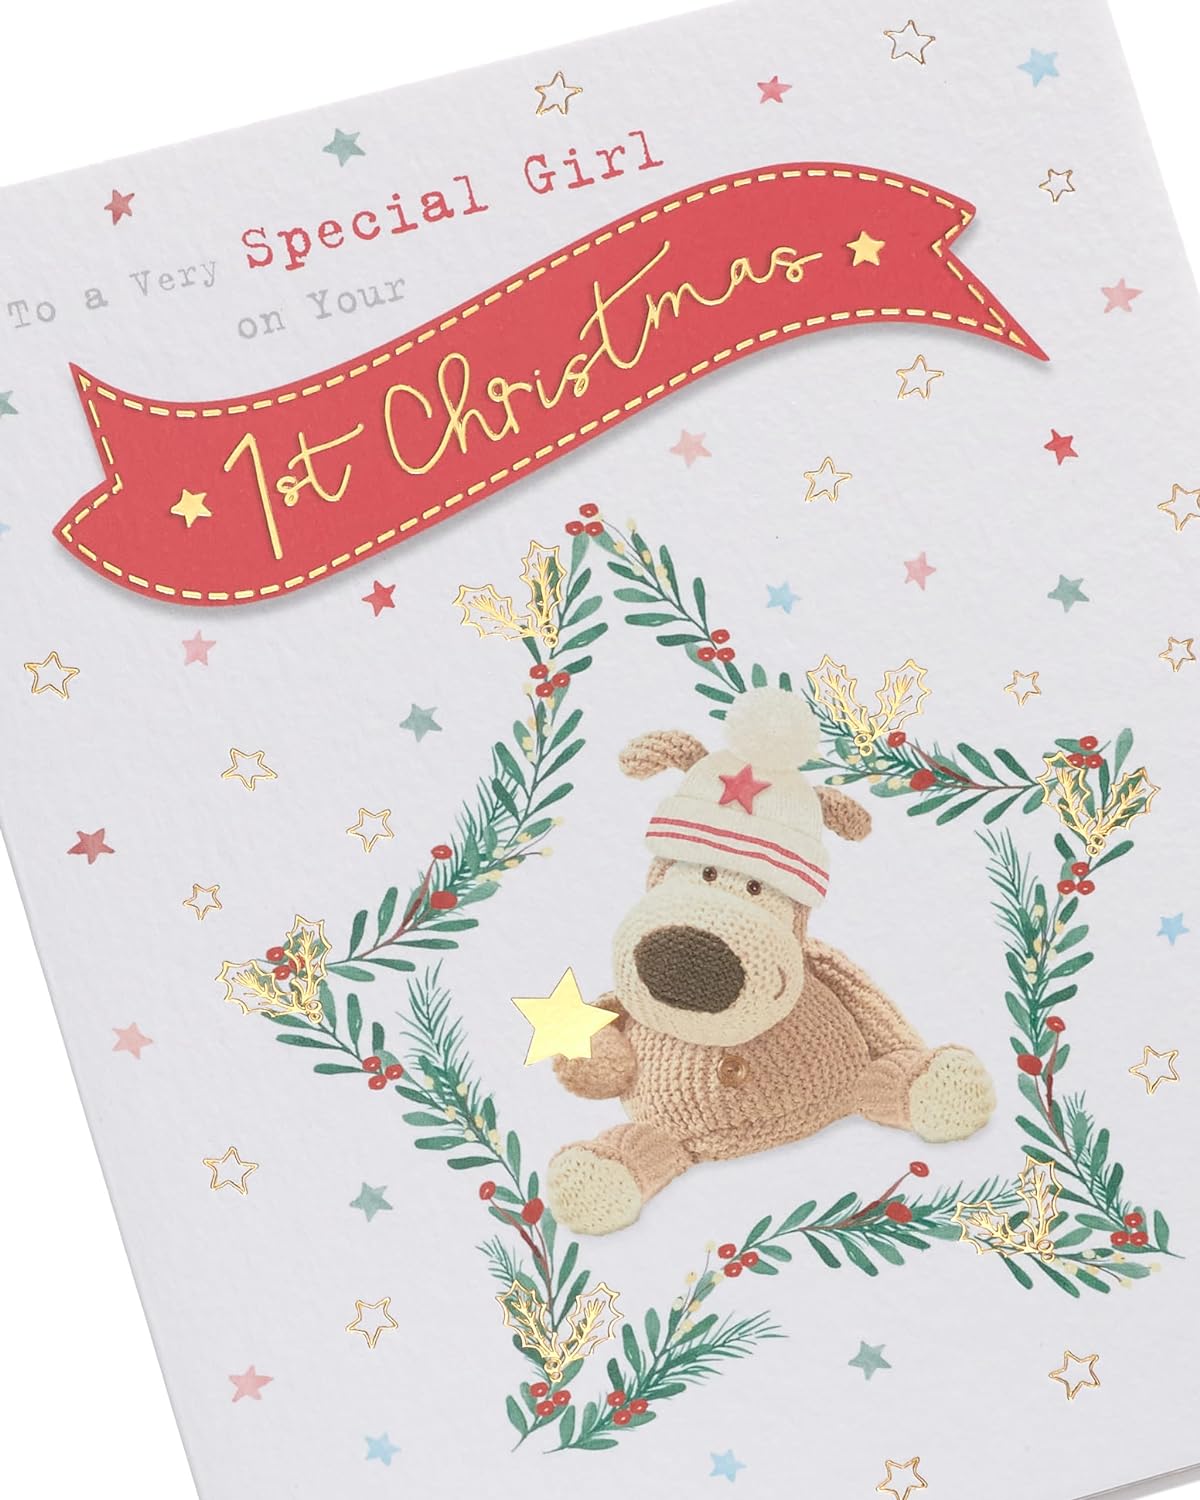 Very Special Girl On Your 1st Christmas Card Cute Boofle